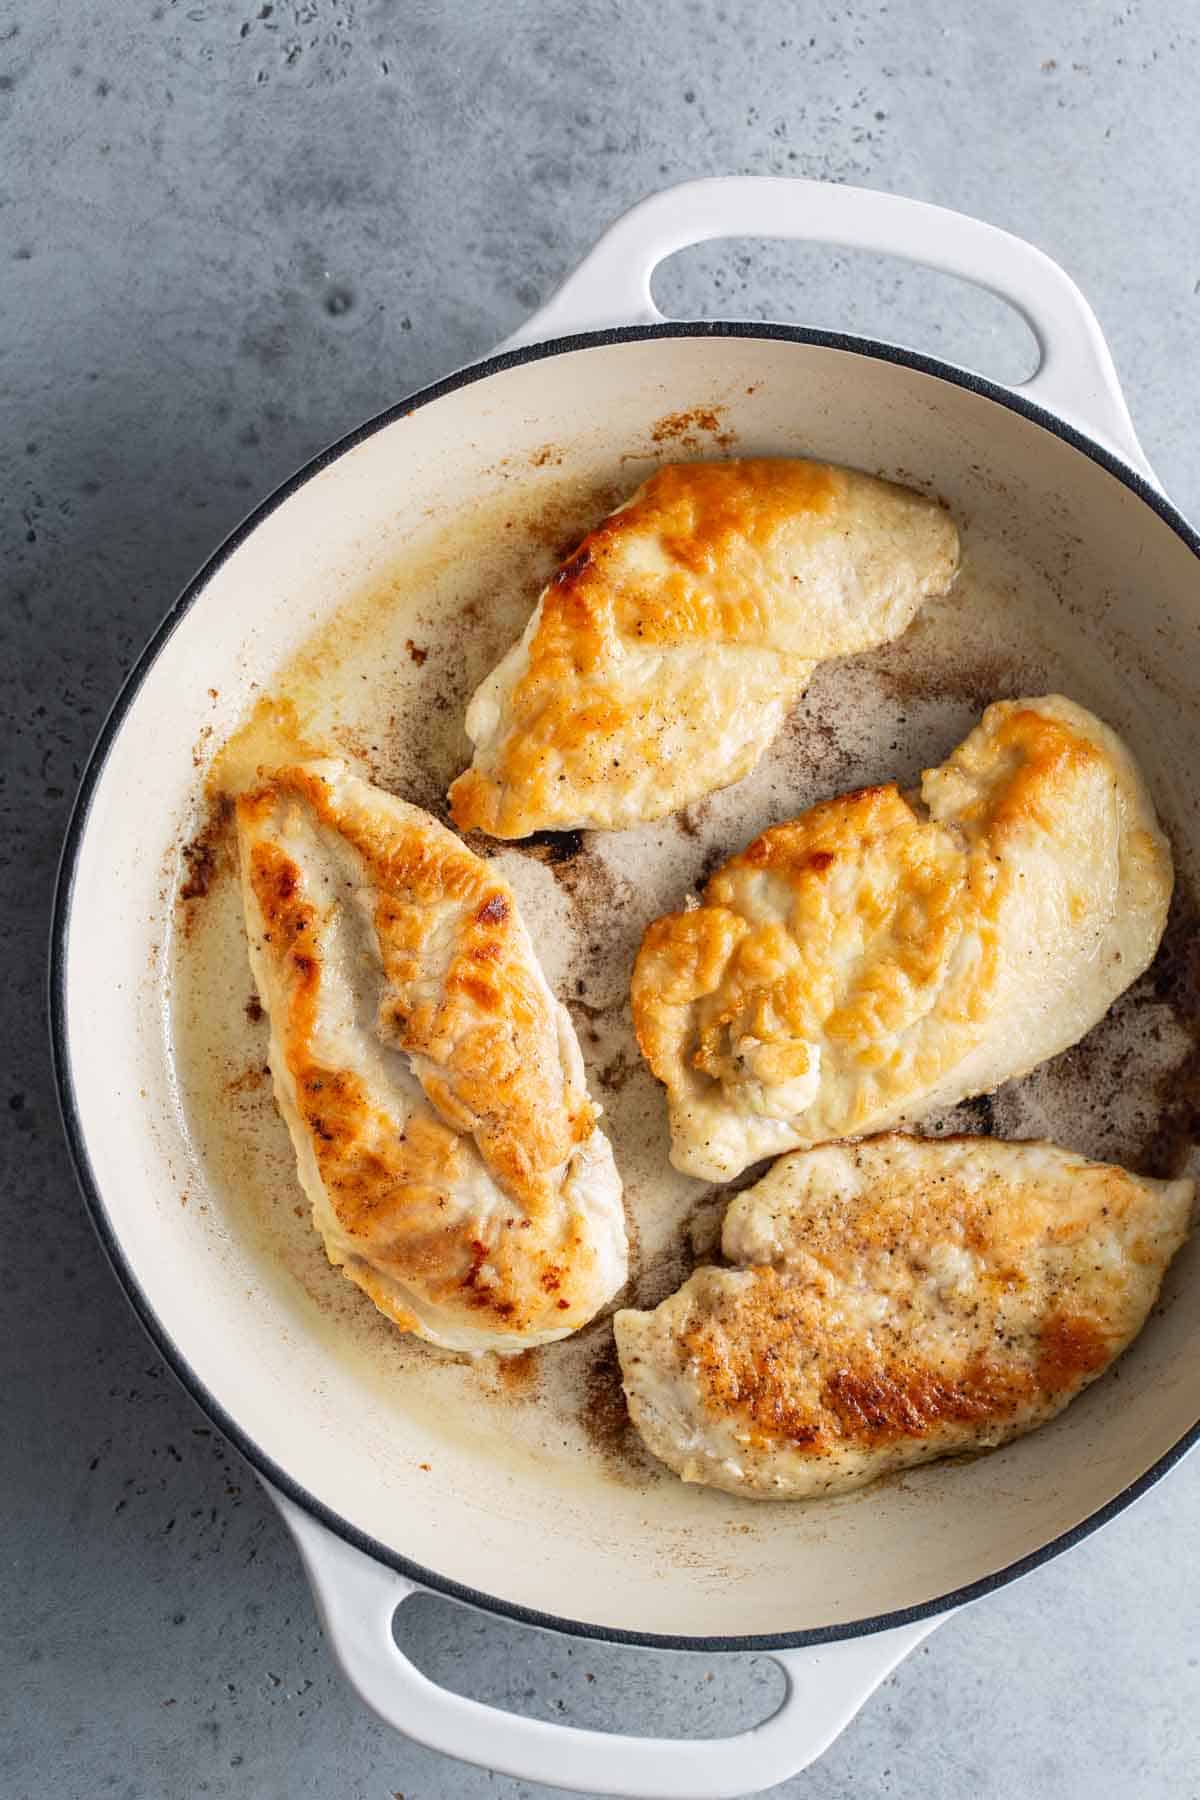 Chicken breasts in a skillet on a gray background.